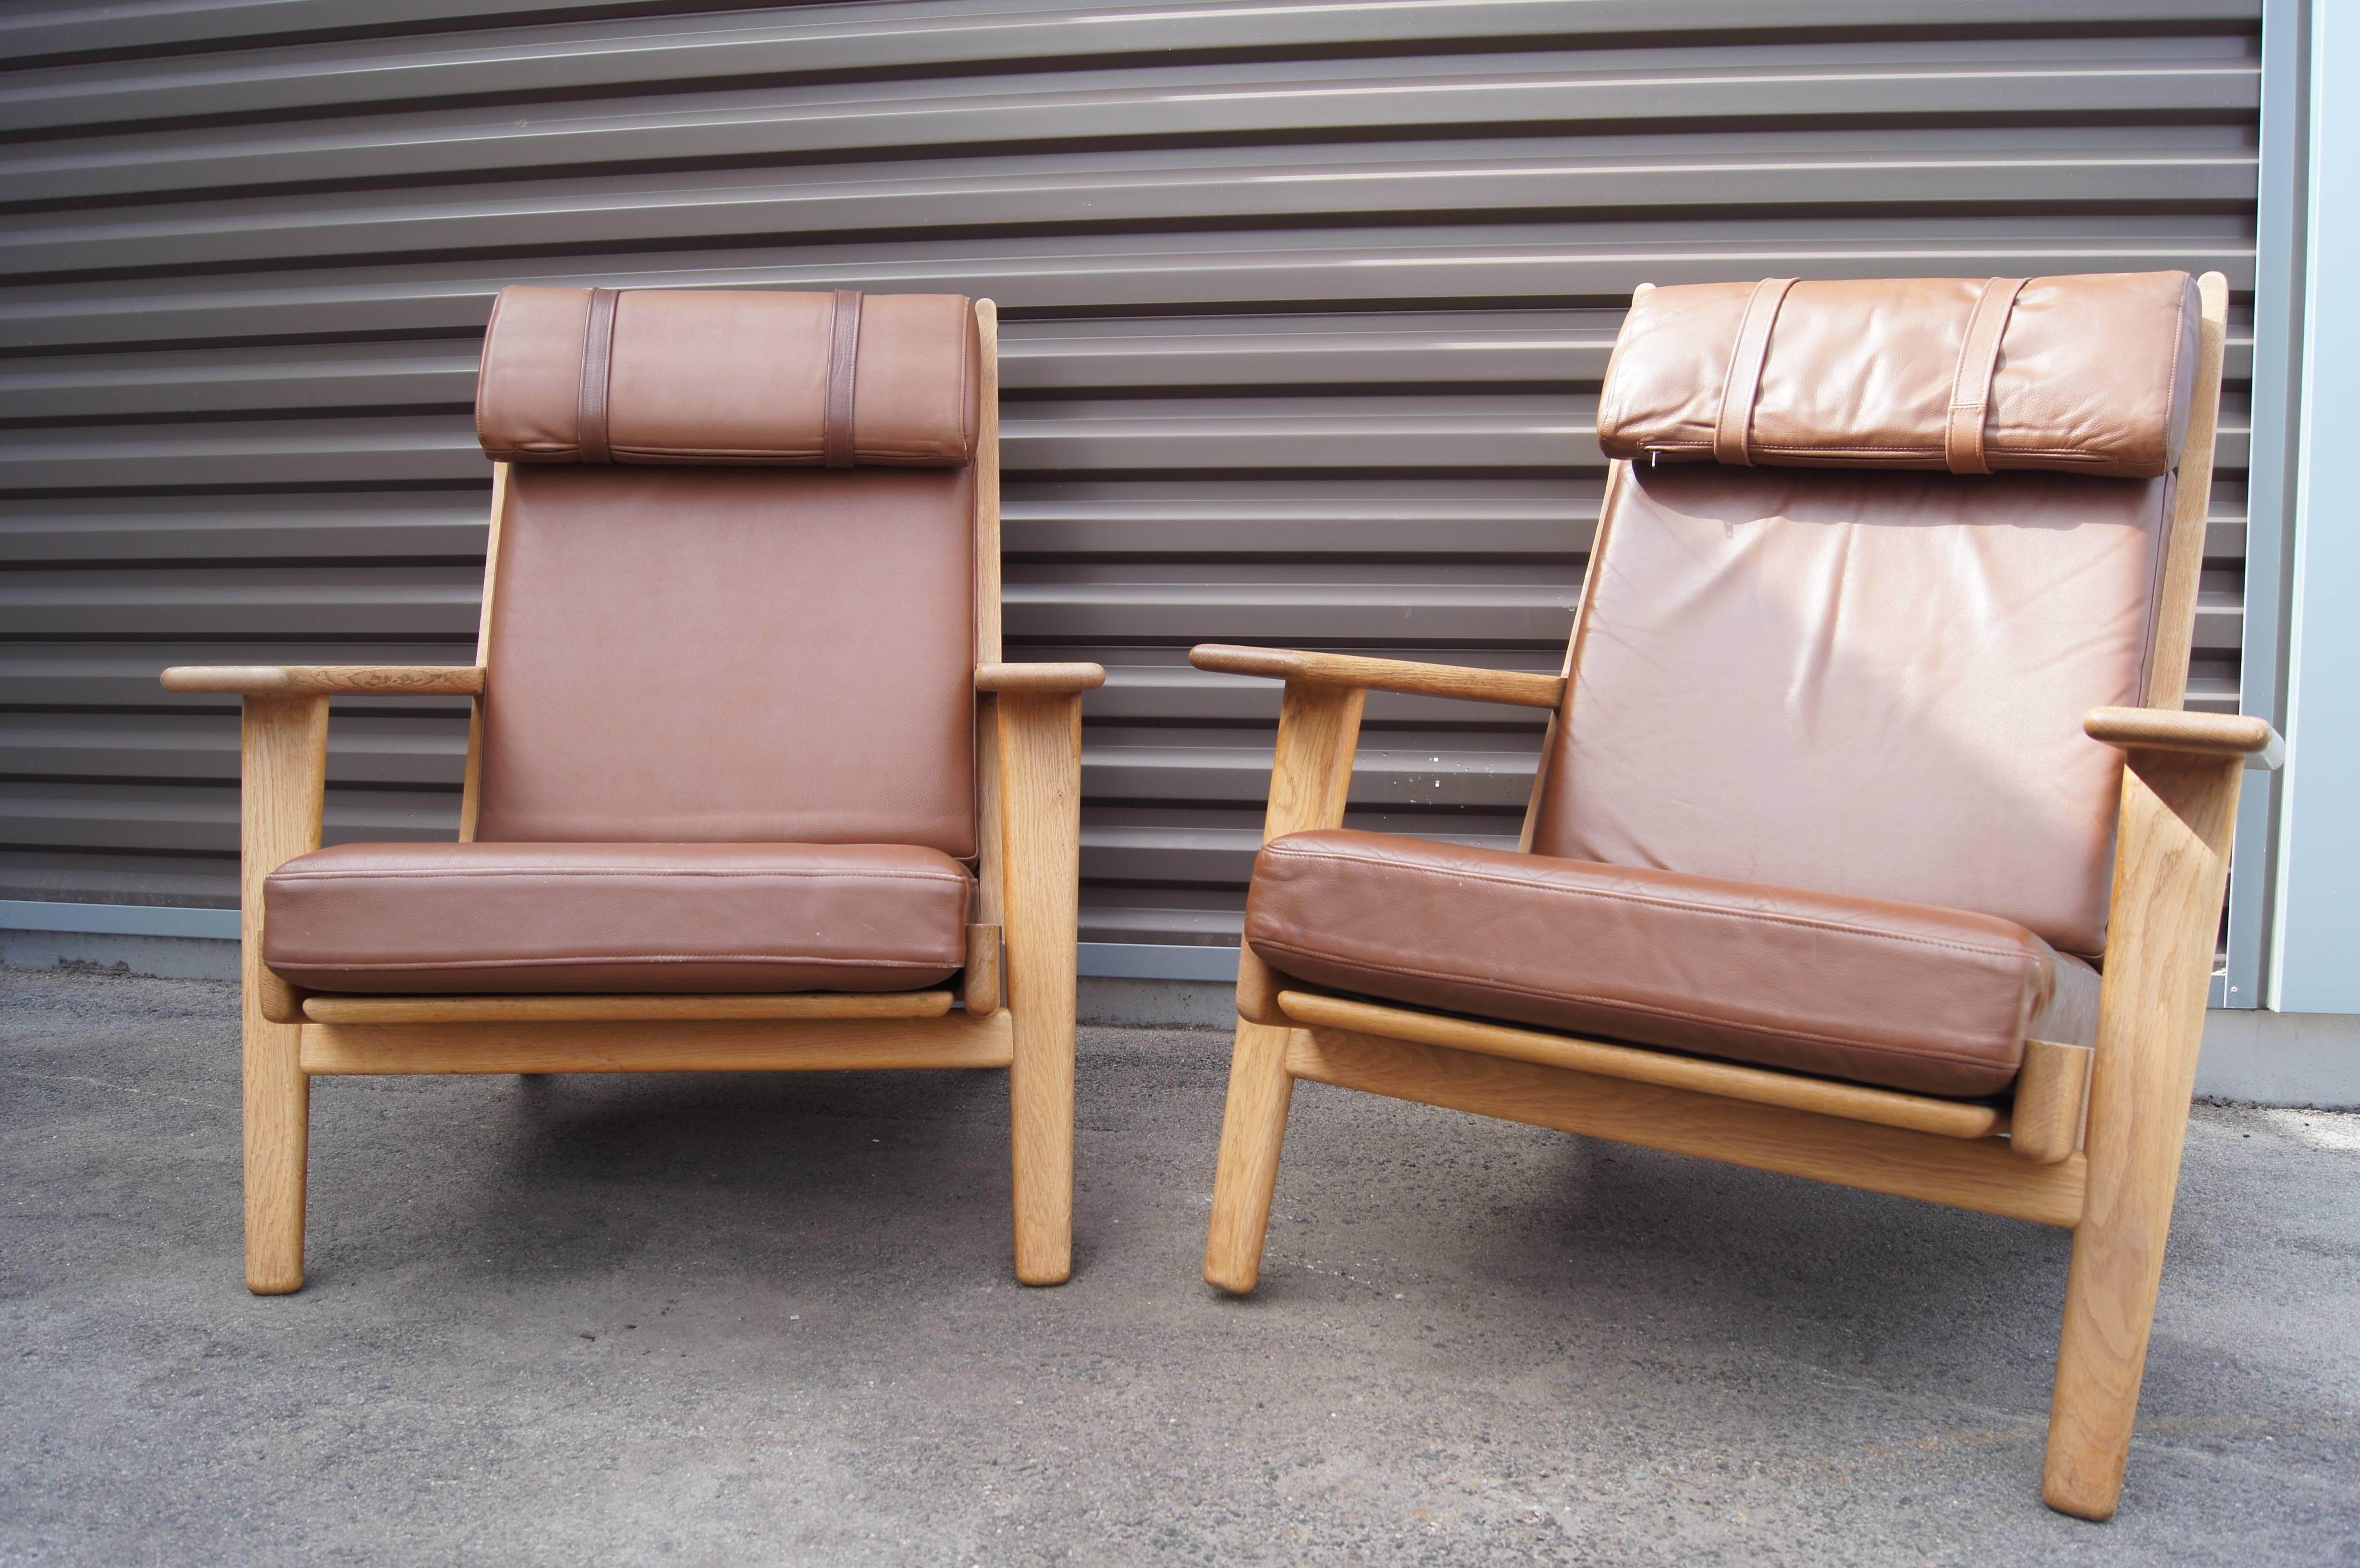 20th Century Oak and Leather High-Back Chair, GE 290, by Hans Wegner for GETAMA